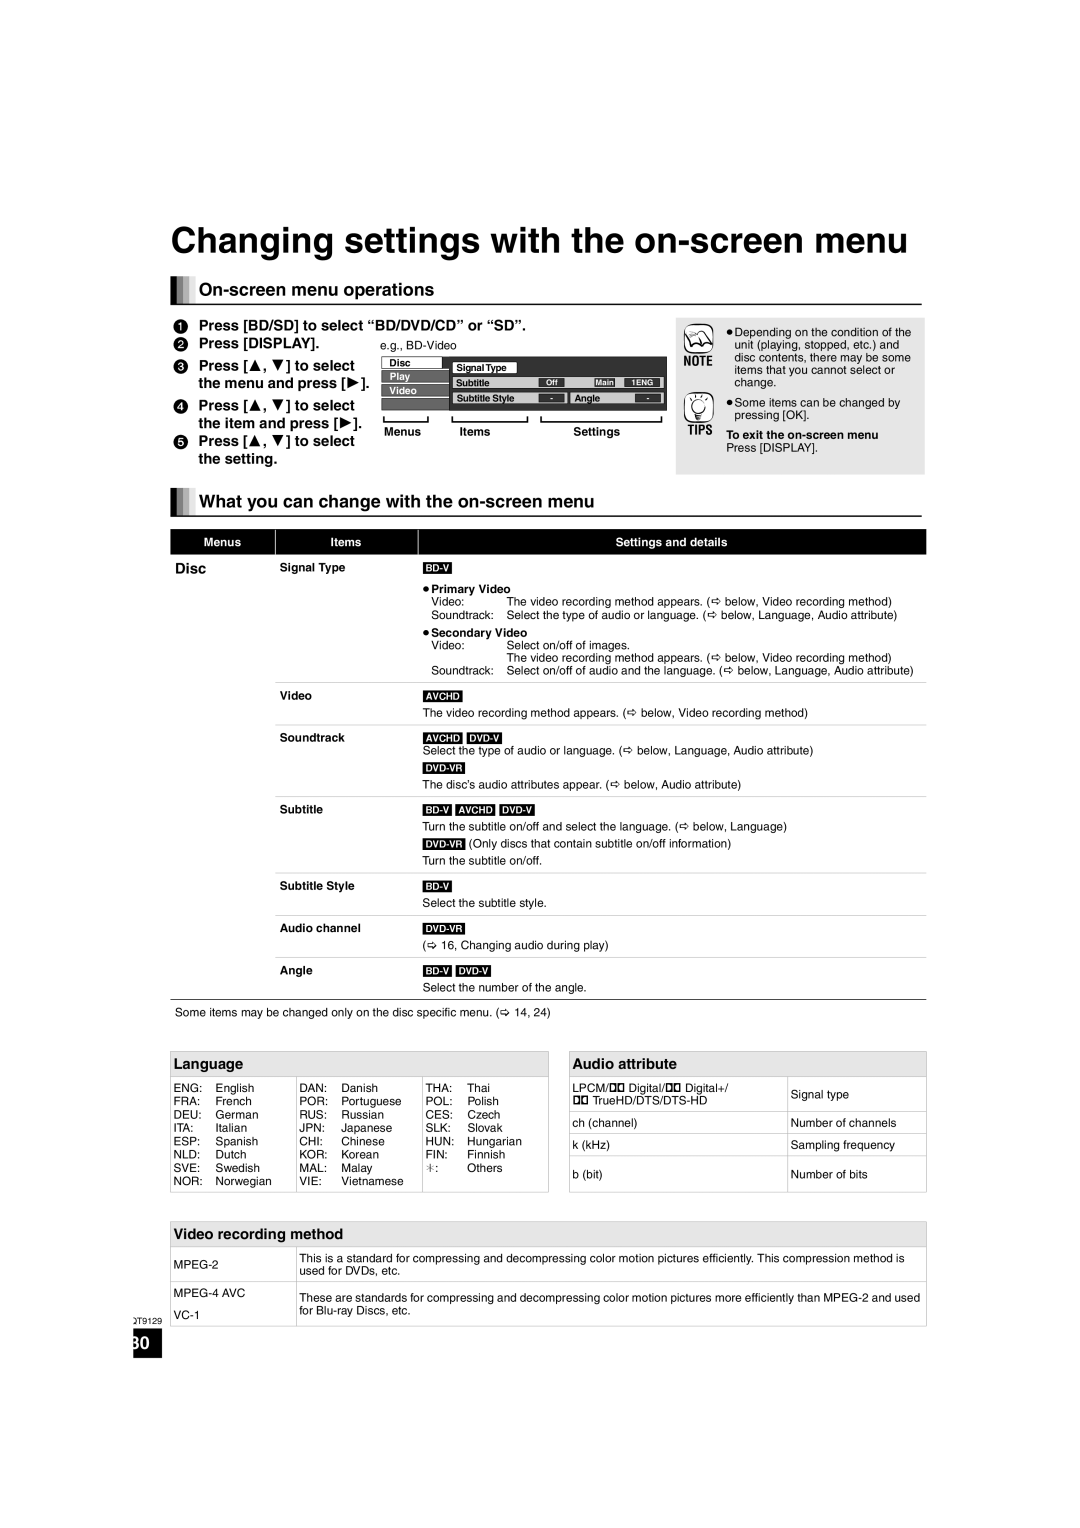 Panasonic SC-BT100 Changing settings with the on-screenmenu, On-screenmenu operations, Press DISPLAY, Press 3, 4 to select 